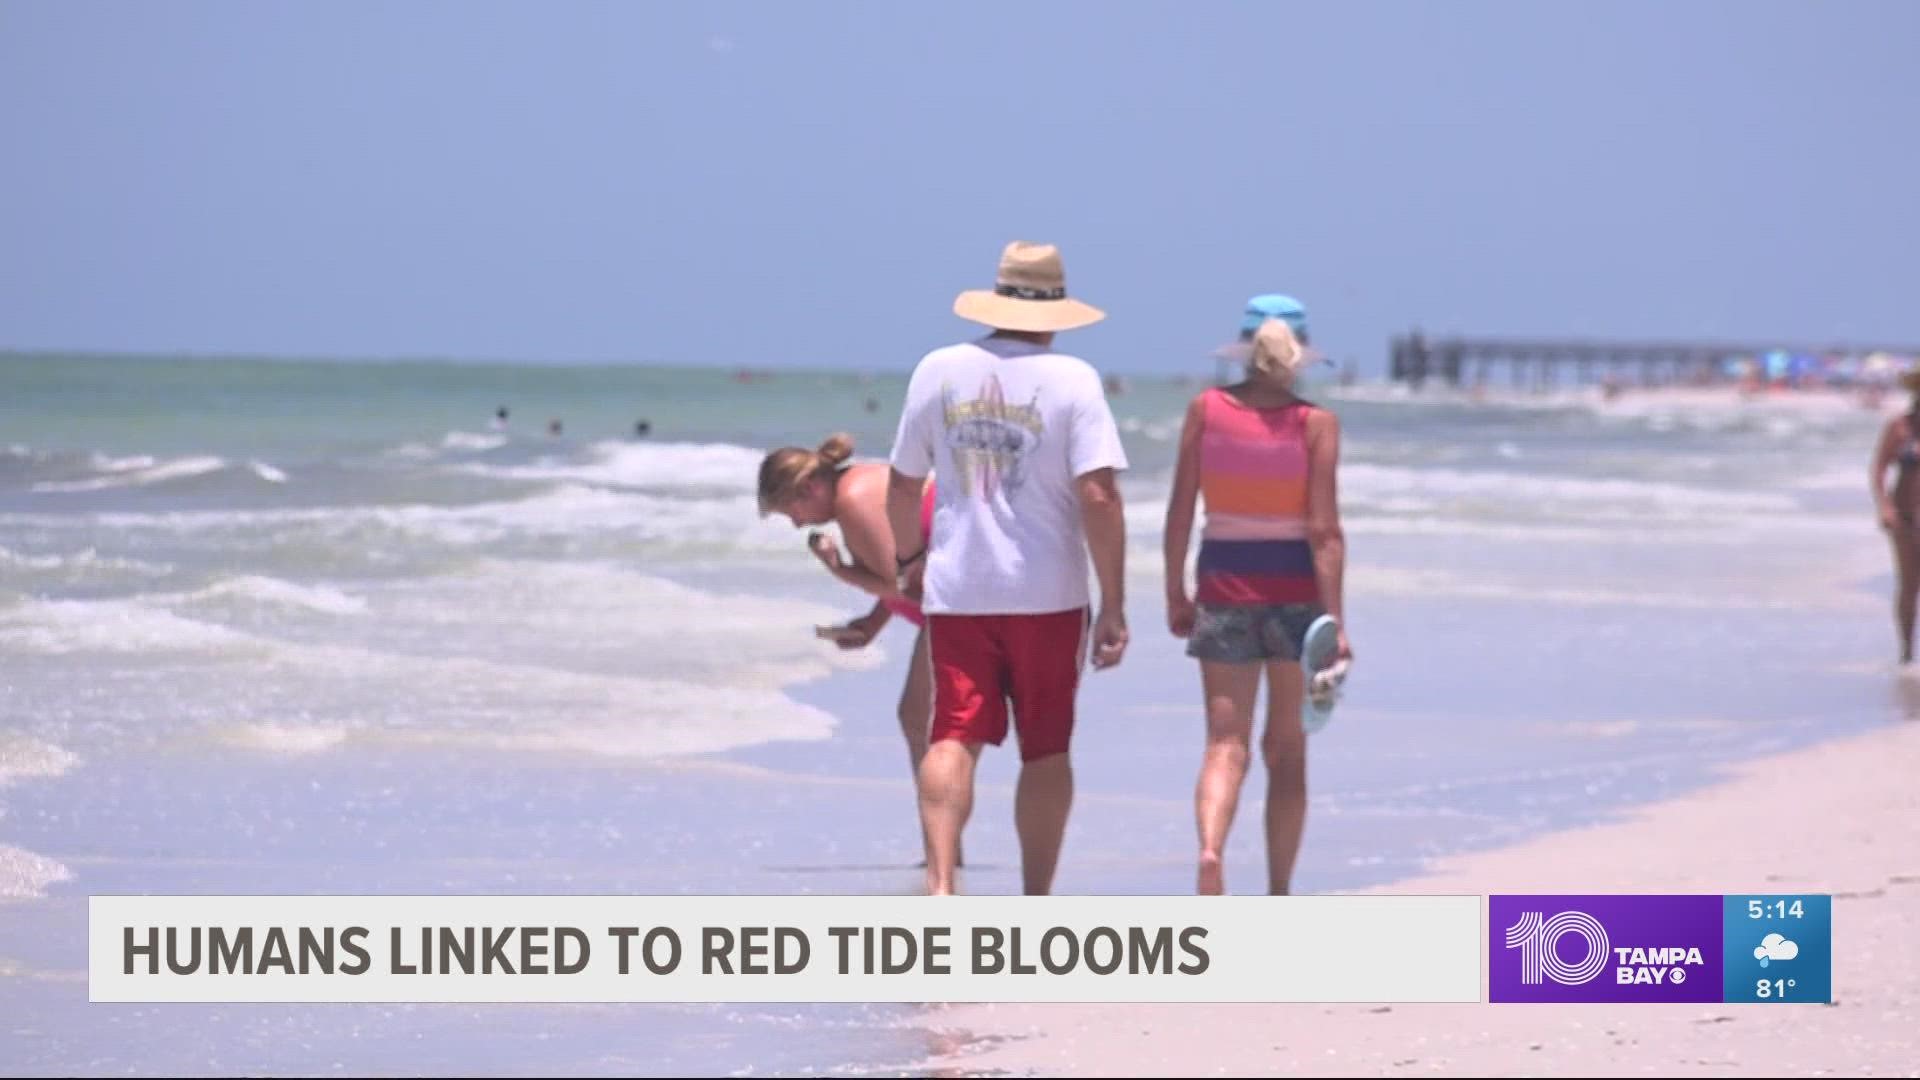 Researchers at the University of Florida conducted a study and their findings reveal that humans are linked to making red tide blooms worse.